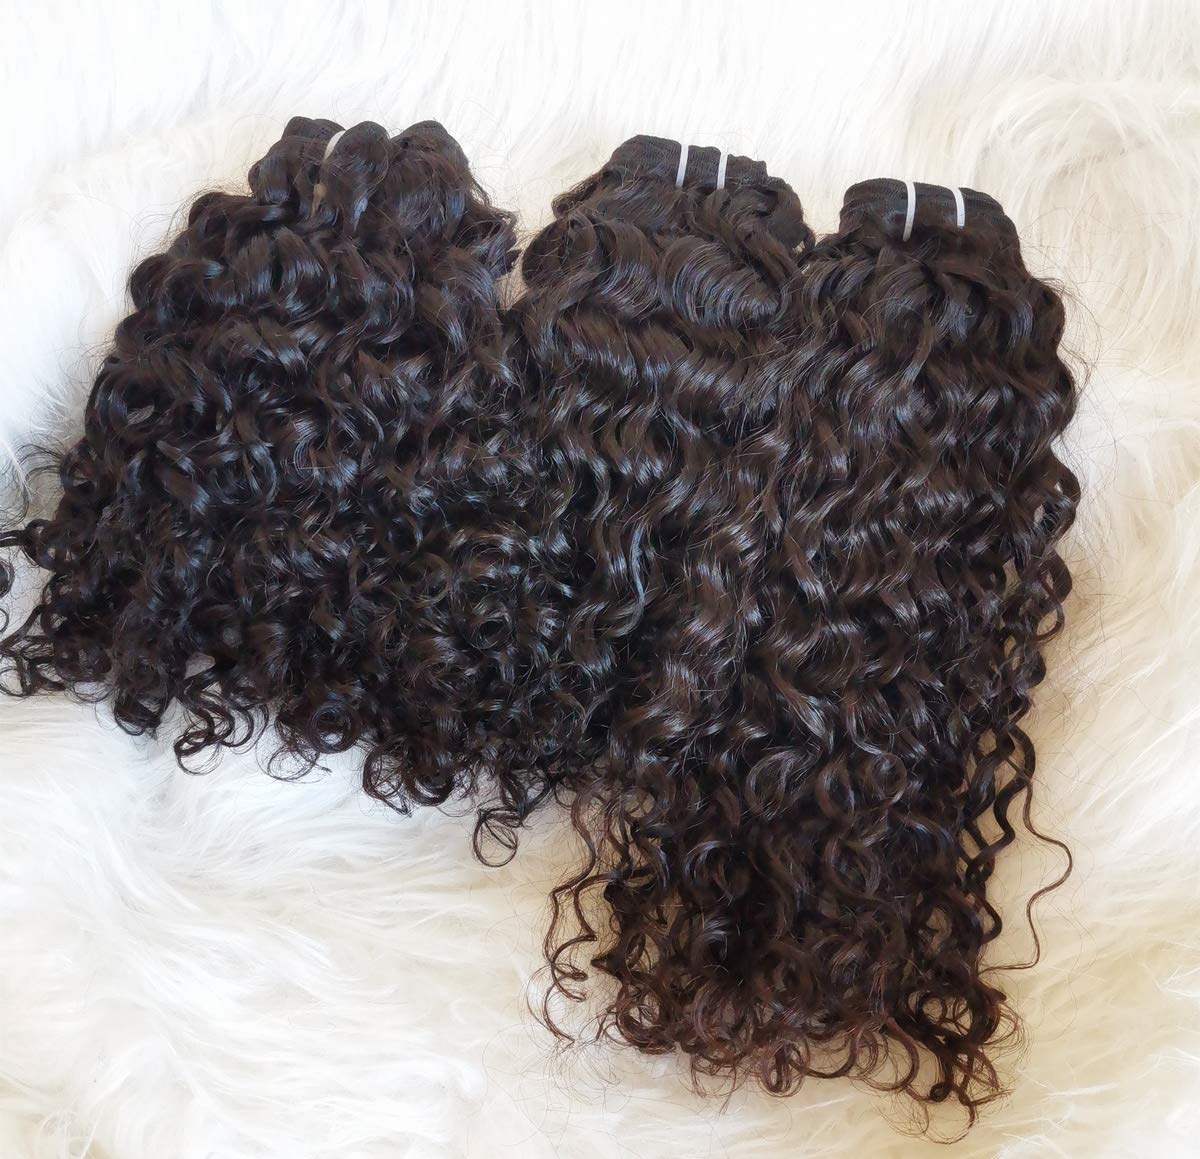 Raw Loose Curly Bundle Deals ~ On Hand